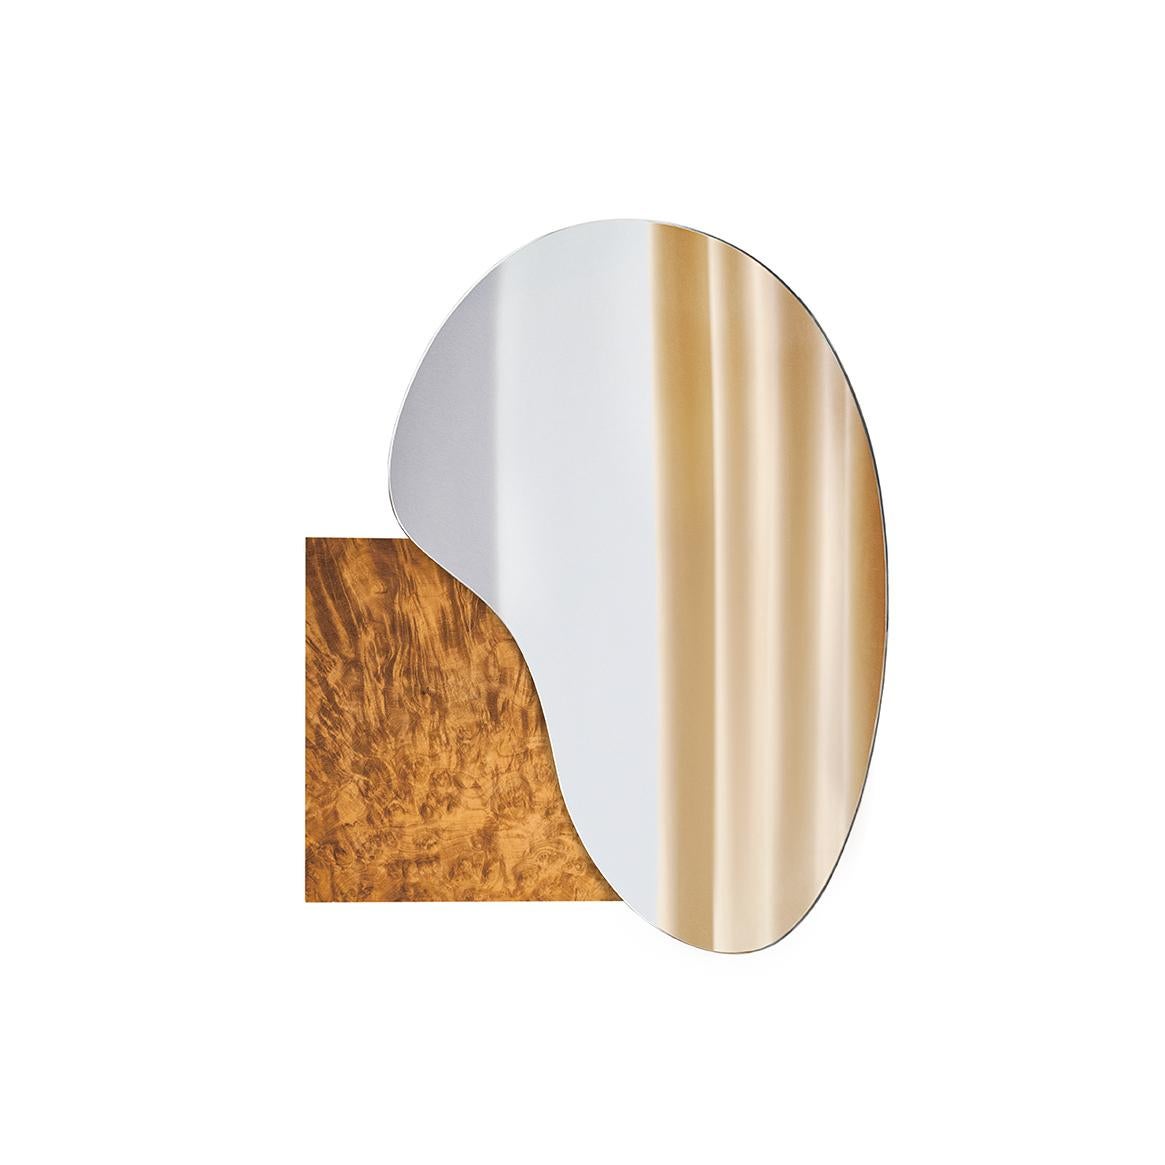 Ukrainian Modern Wall Mirror Lake 4 by Noom with Brushed Brass Base